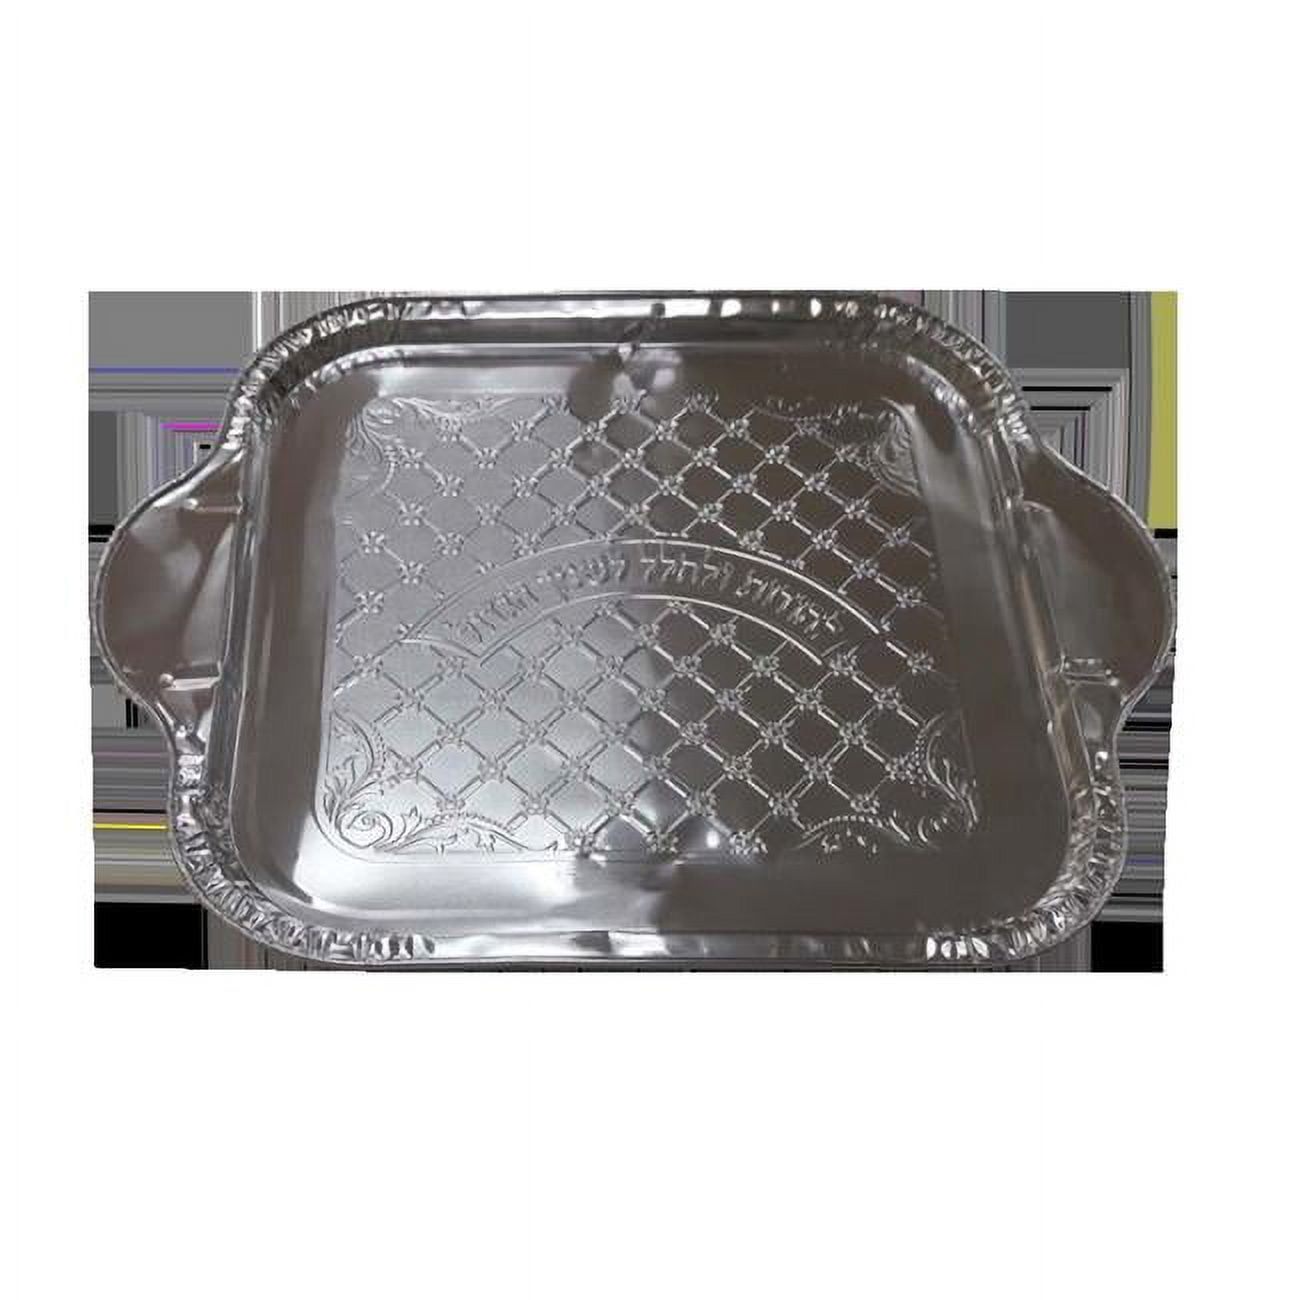 Picture of Bazeh Madlukin 71507 12.5 x 12.5 in. Aluminum Tray for Chanukah Lighting